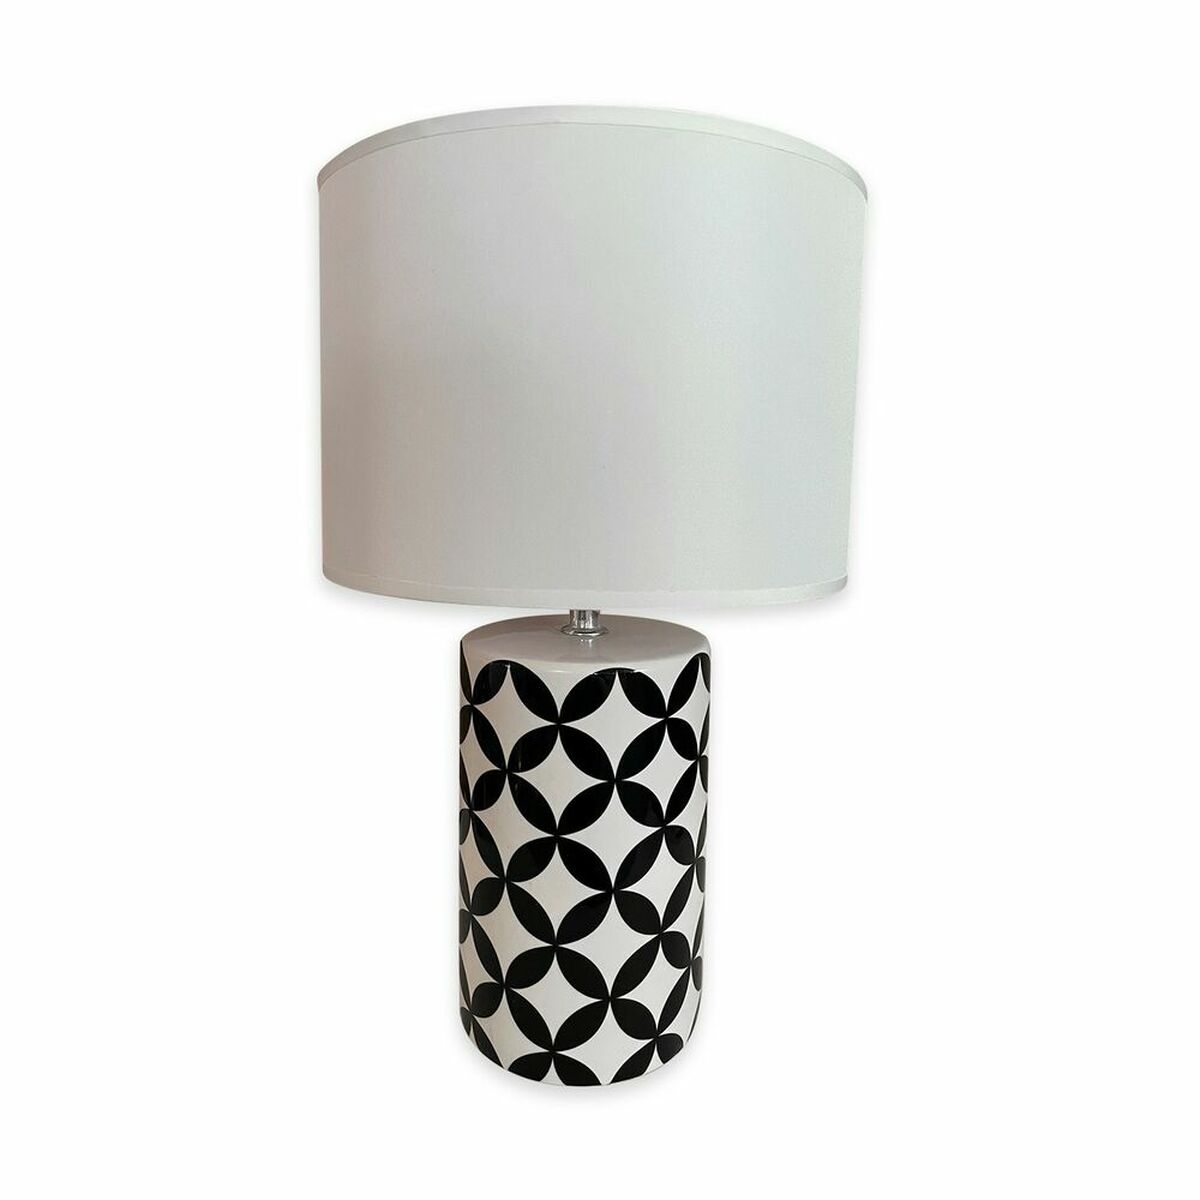 Lamp with star design